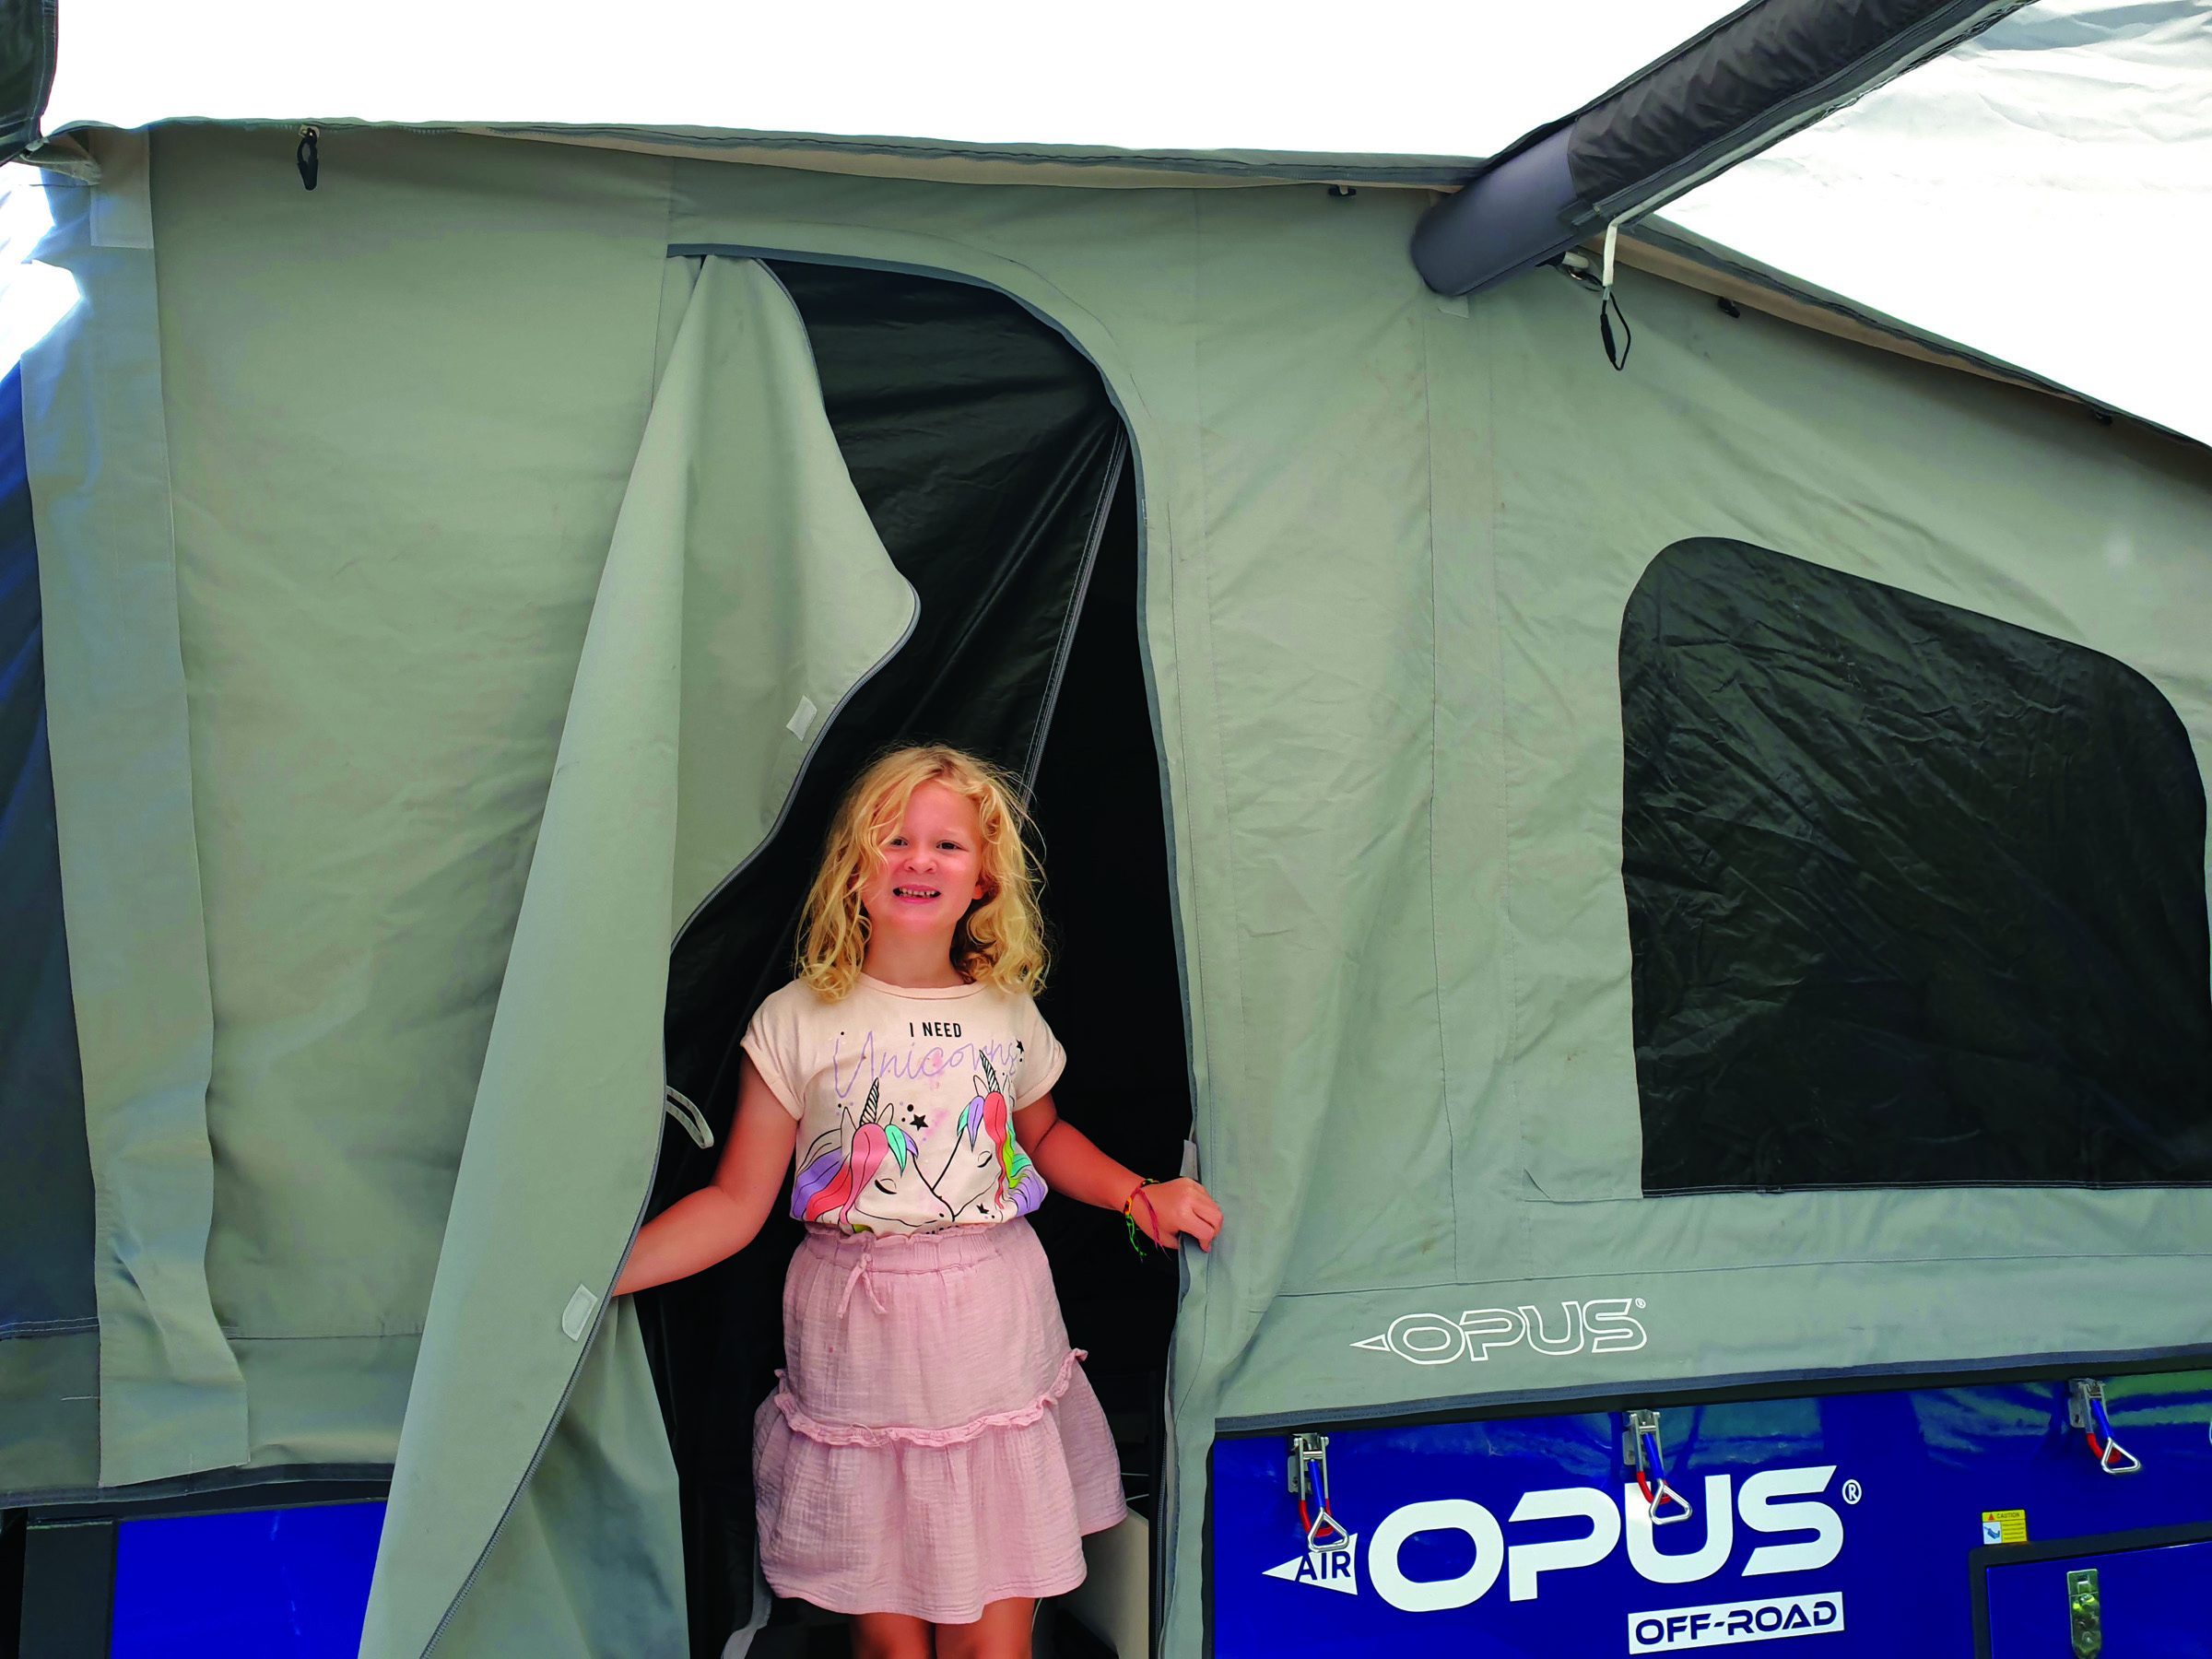 Rob's daughter Georgie in the door of the tent for size reference